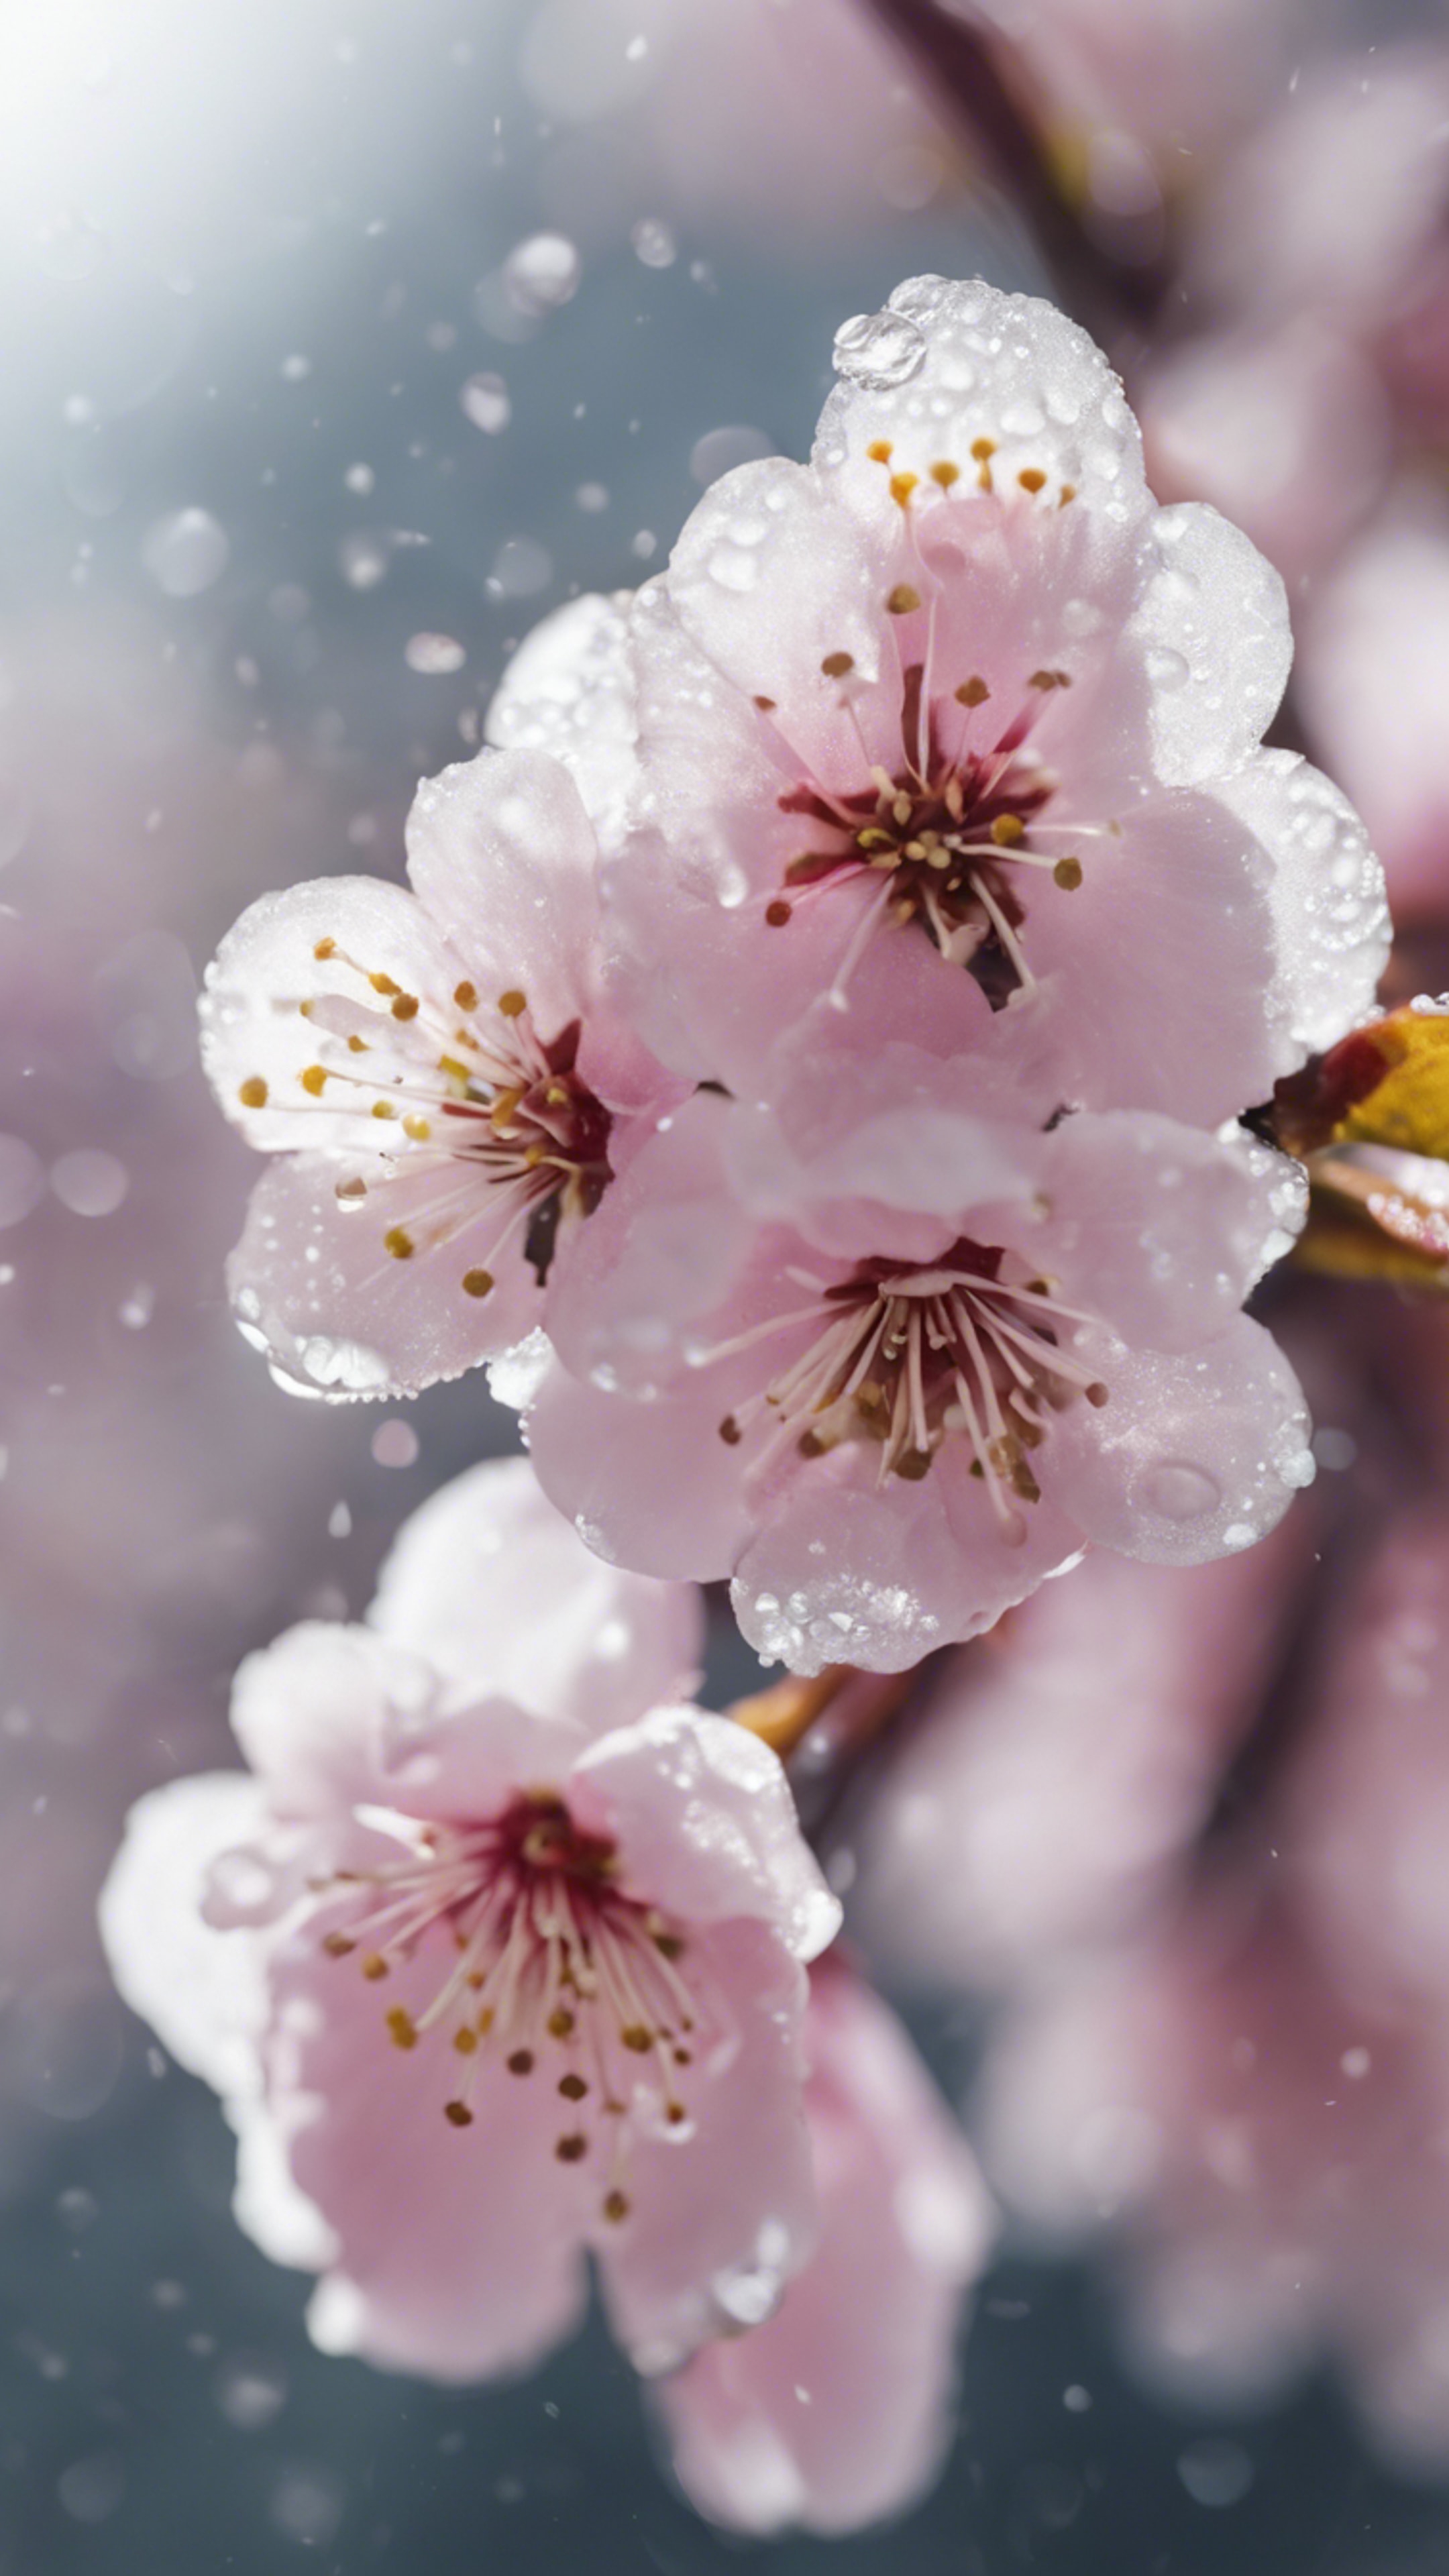 A closeup image of a freshly blooming cherry blossom, speckled with dew drops. Tapet[d7e9cc65cc424f509aa2]